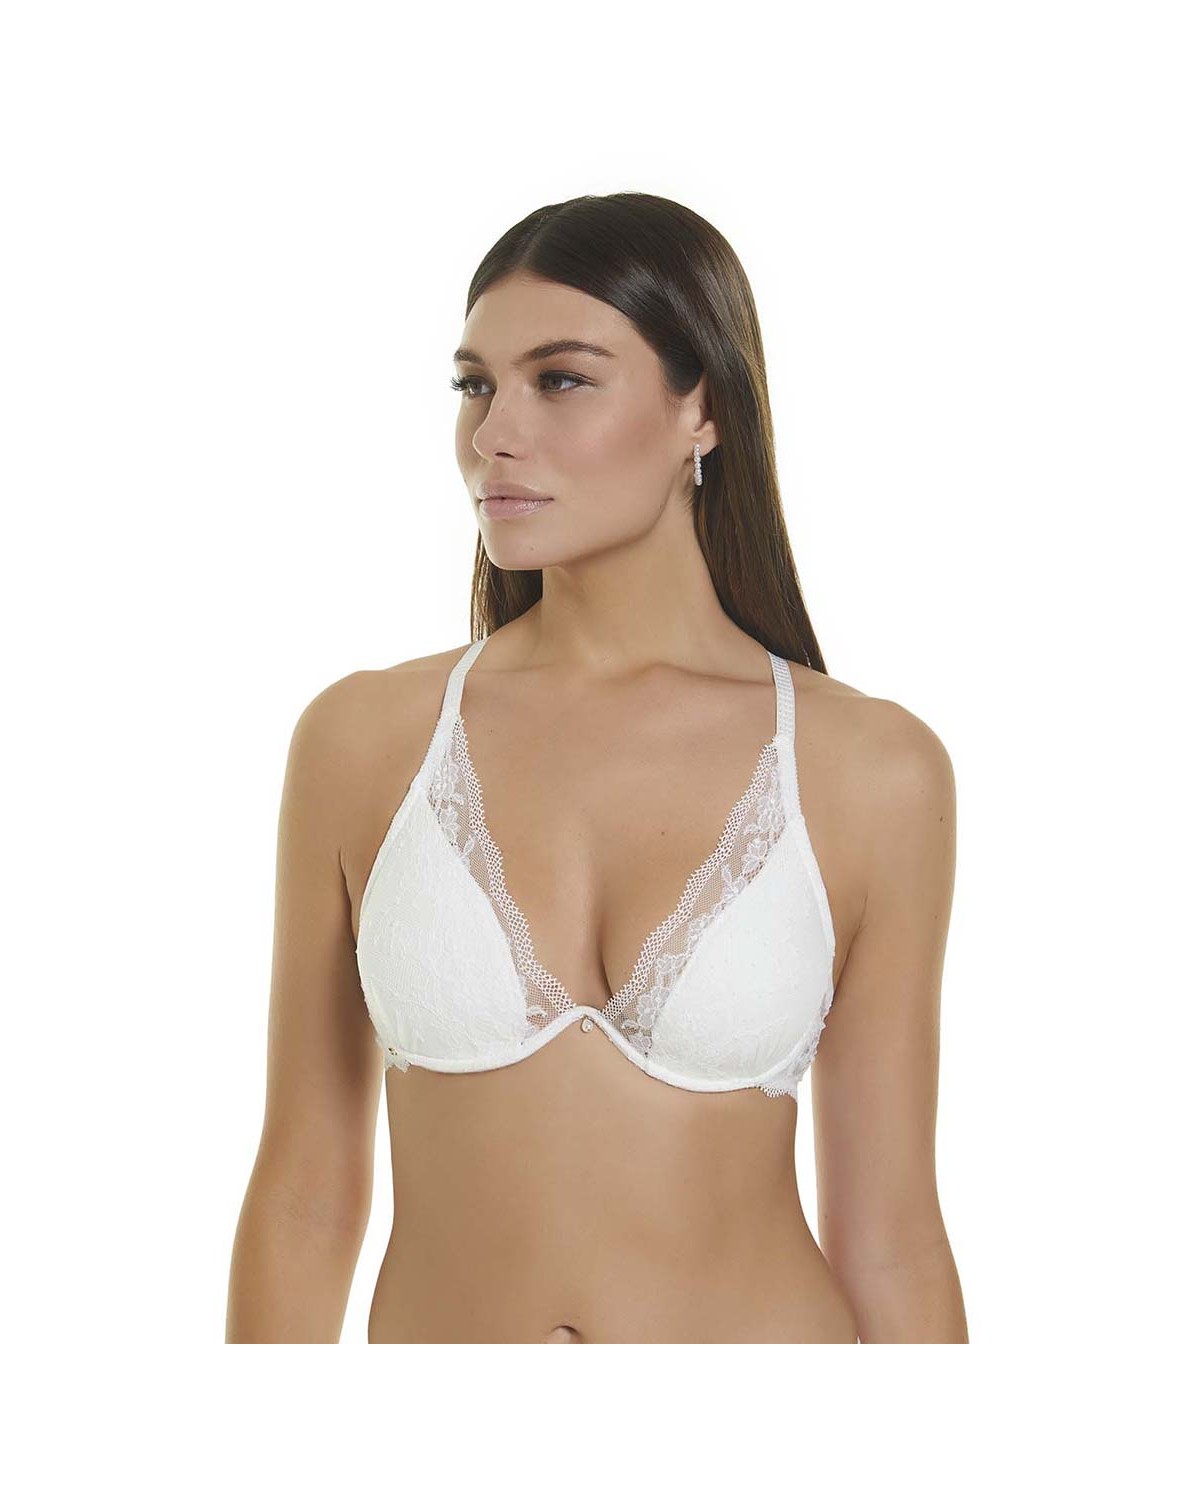 STRAPLESS PUSH UP BRA WITH CONTINUOUS UNDERWIRE